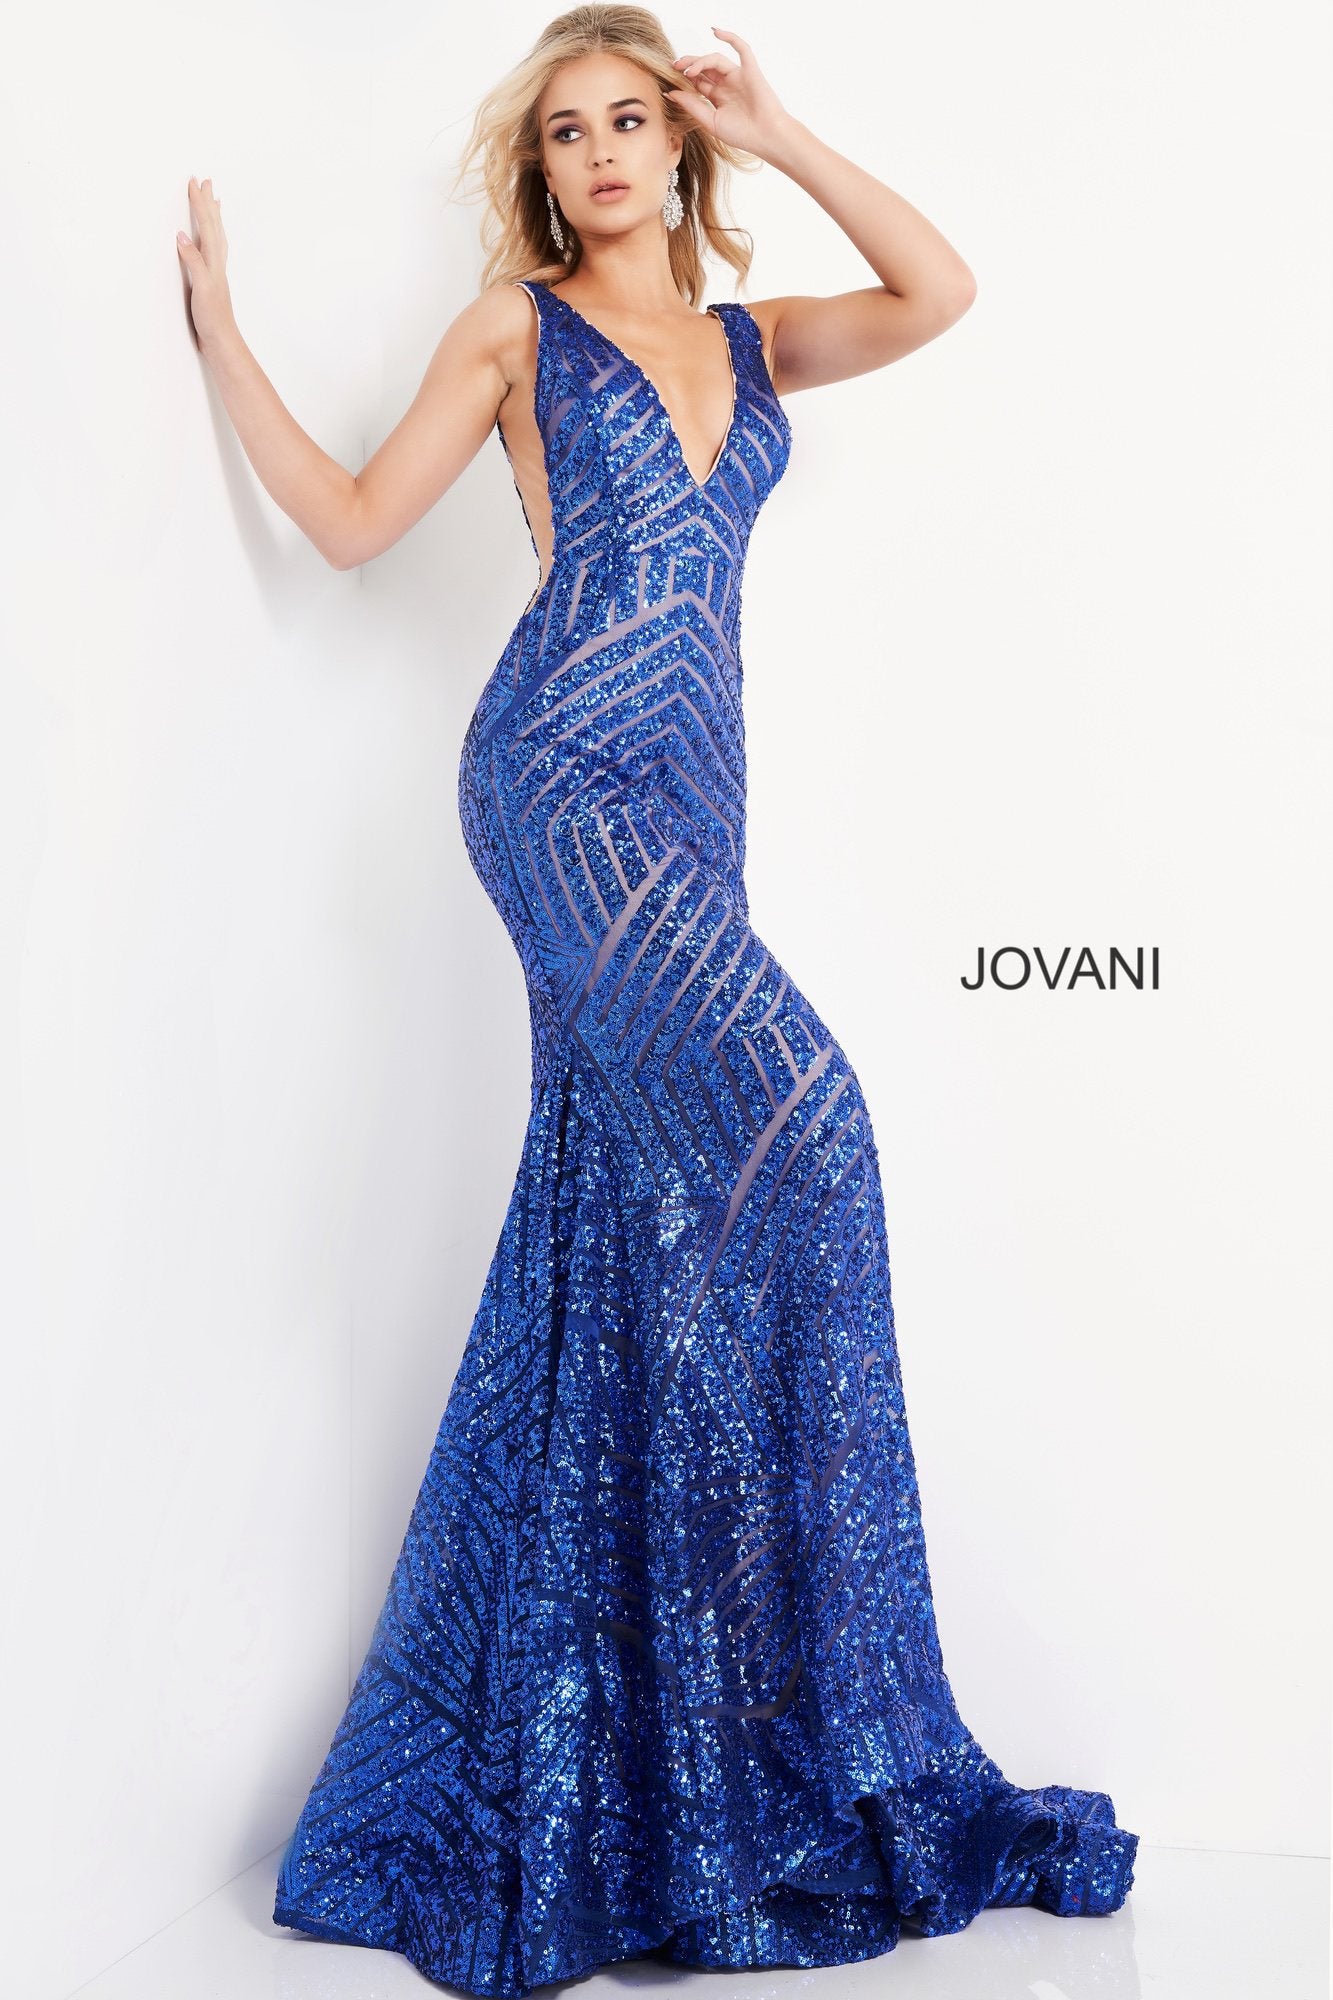 Jovani 59762 Sequin Embellished Mermaid Prom Dress Pageant Gown plunging neckline